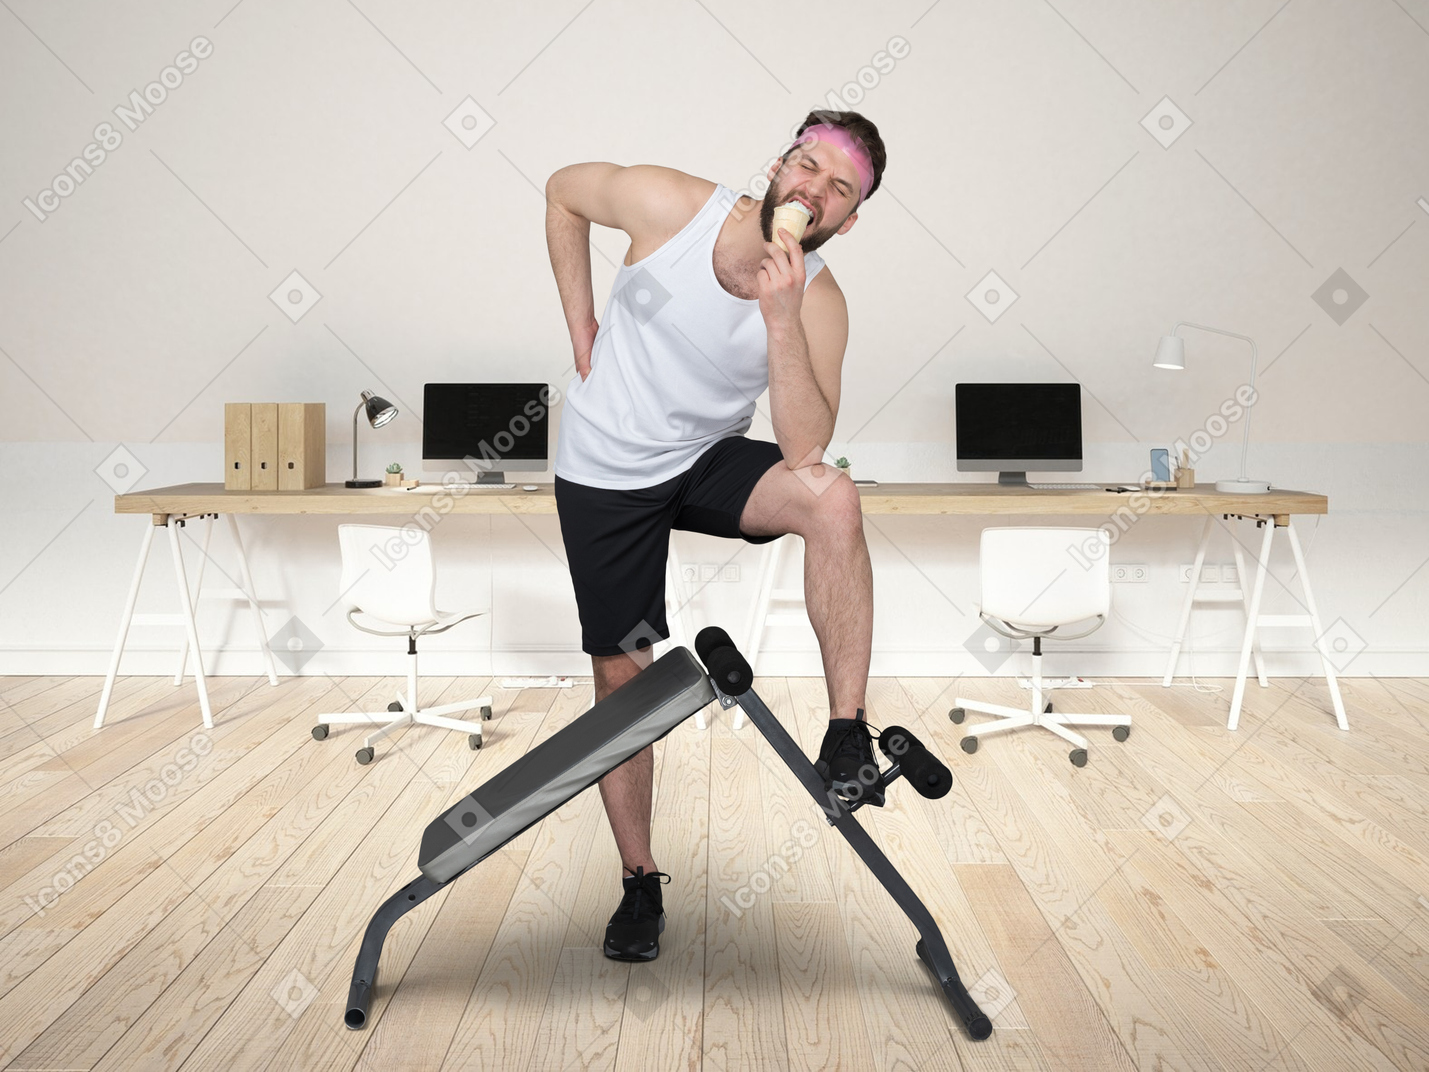 A man standing next to a fitness equipment in the office and eating ice cream